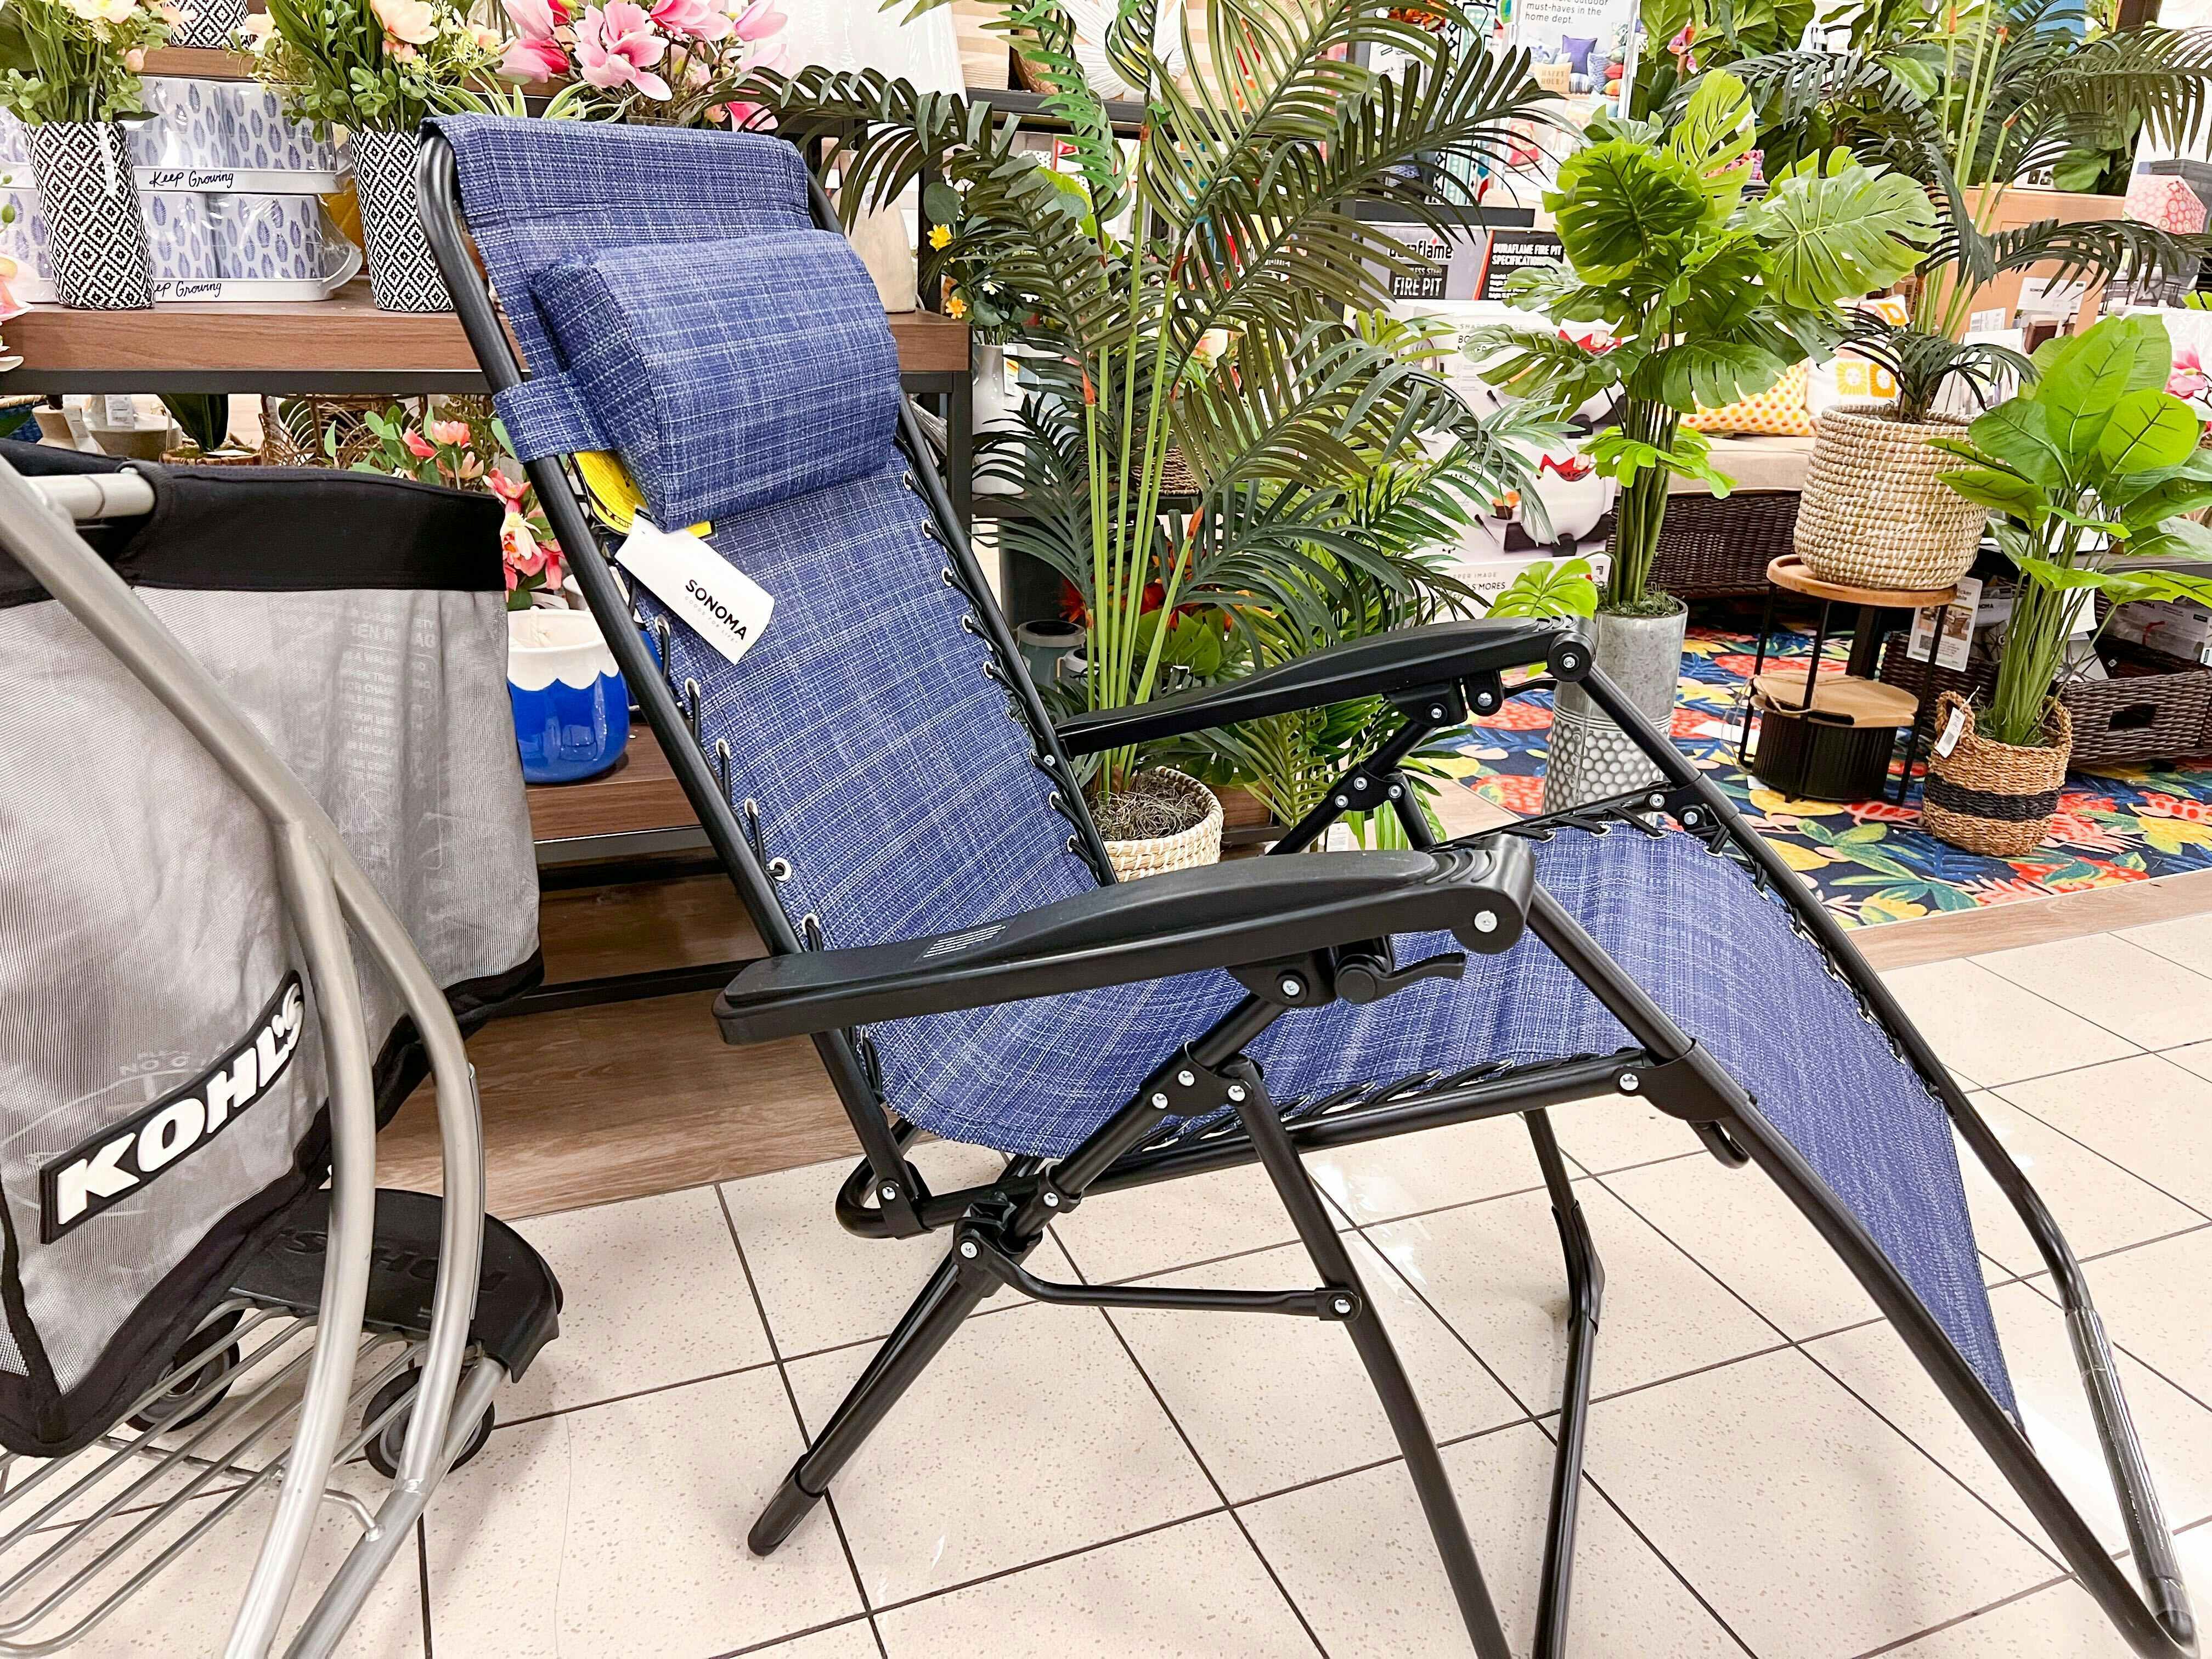 sonoma good for life anti-gravity patio chair at kohl's